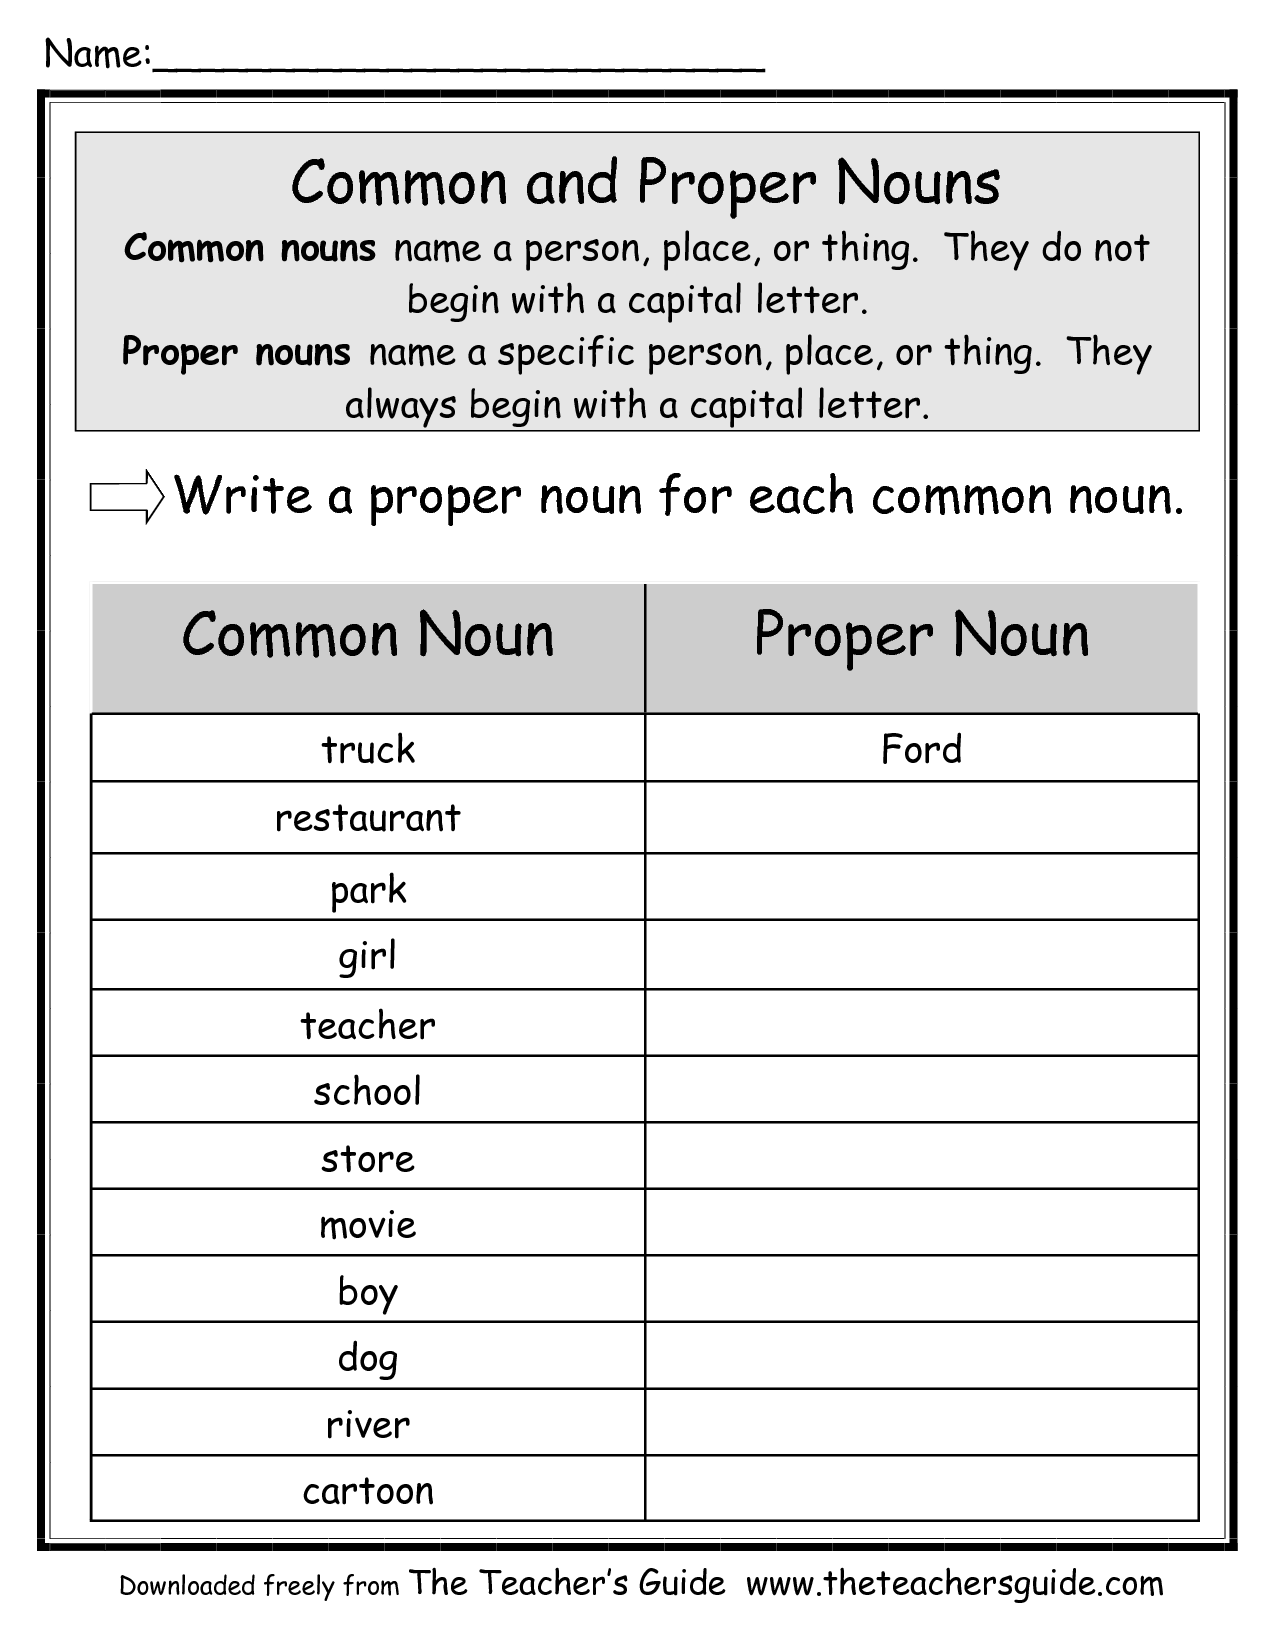 Free Common And Proper Noun Worksheets For 2nd Grade